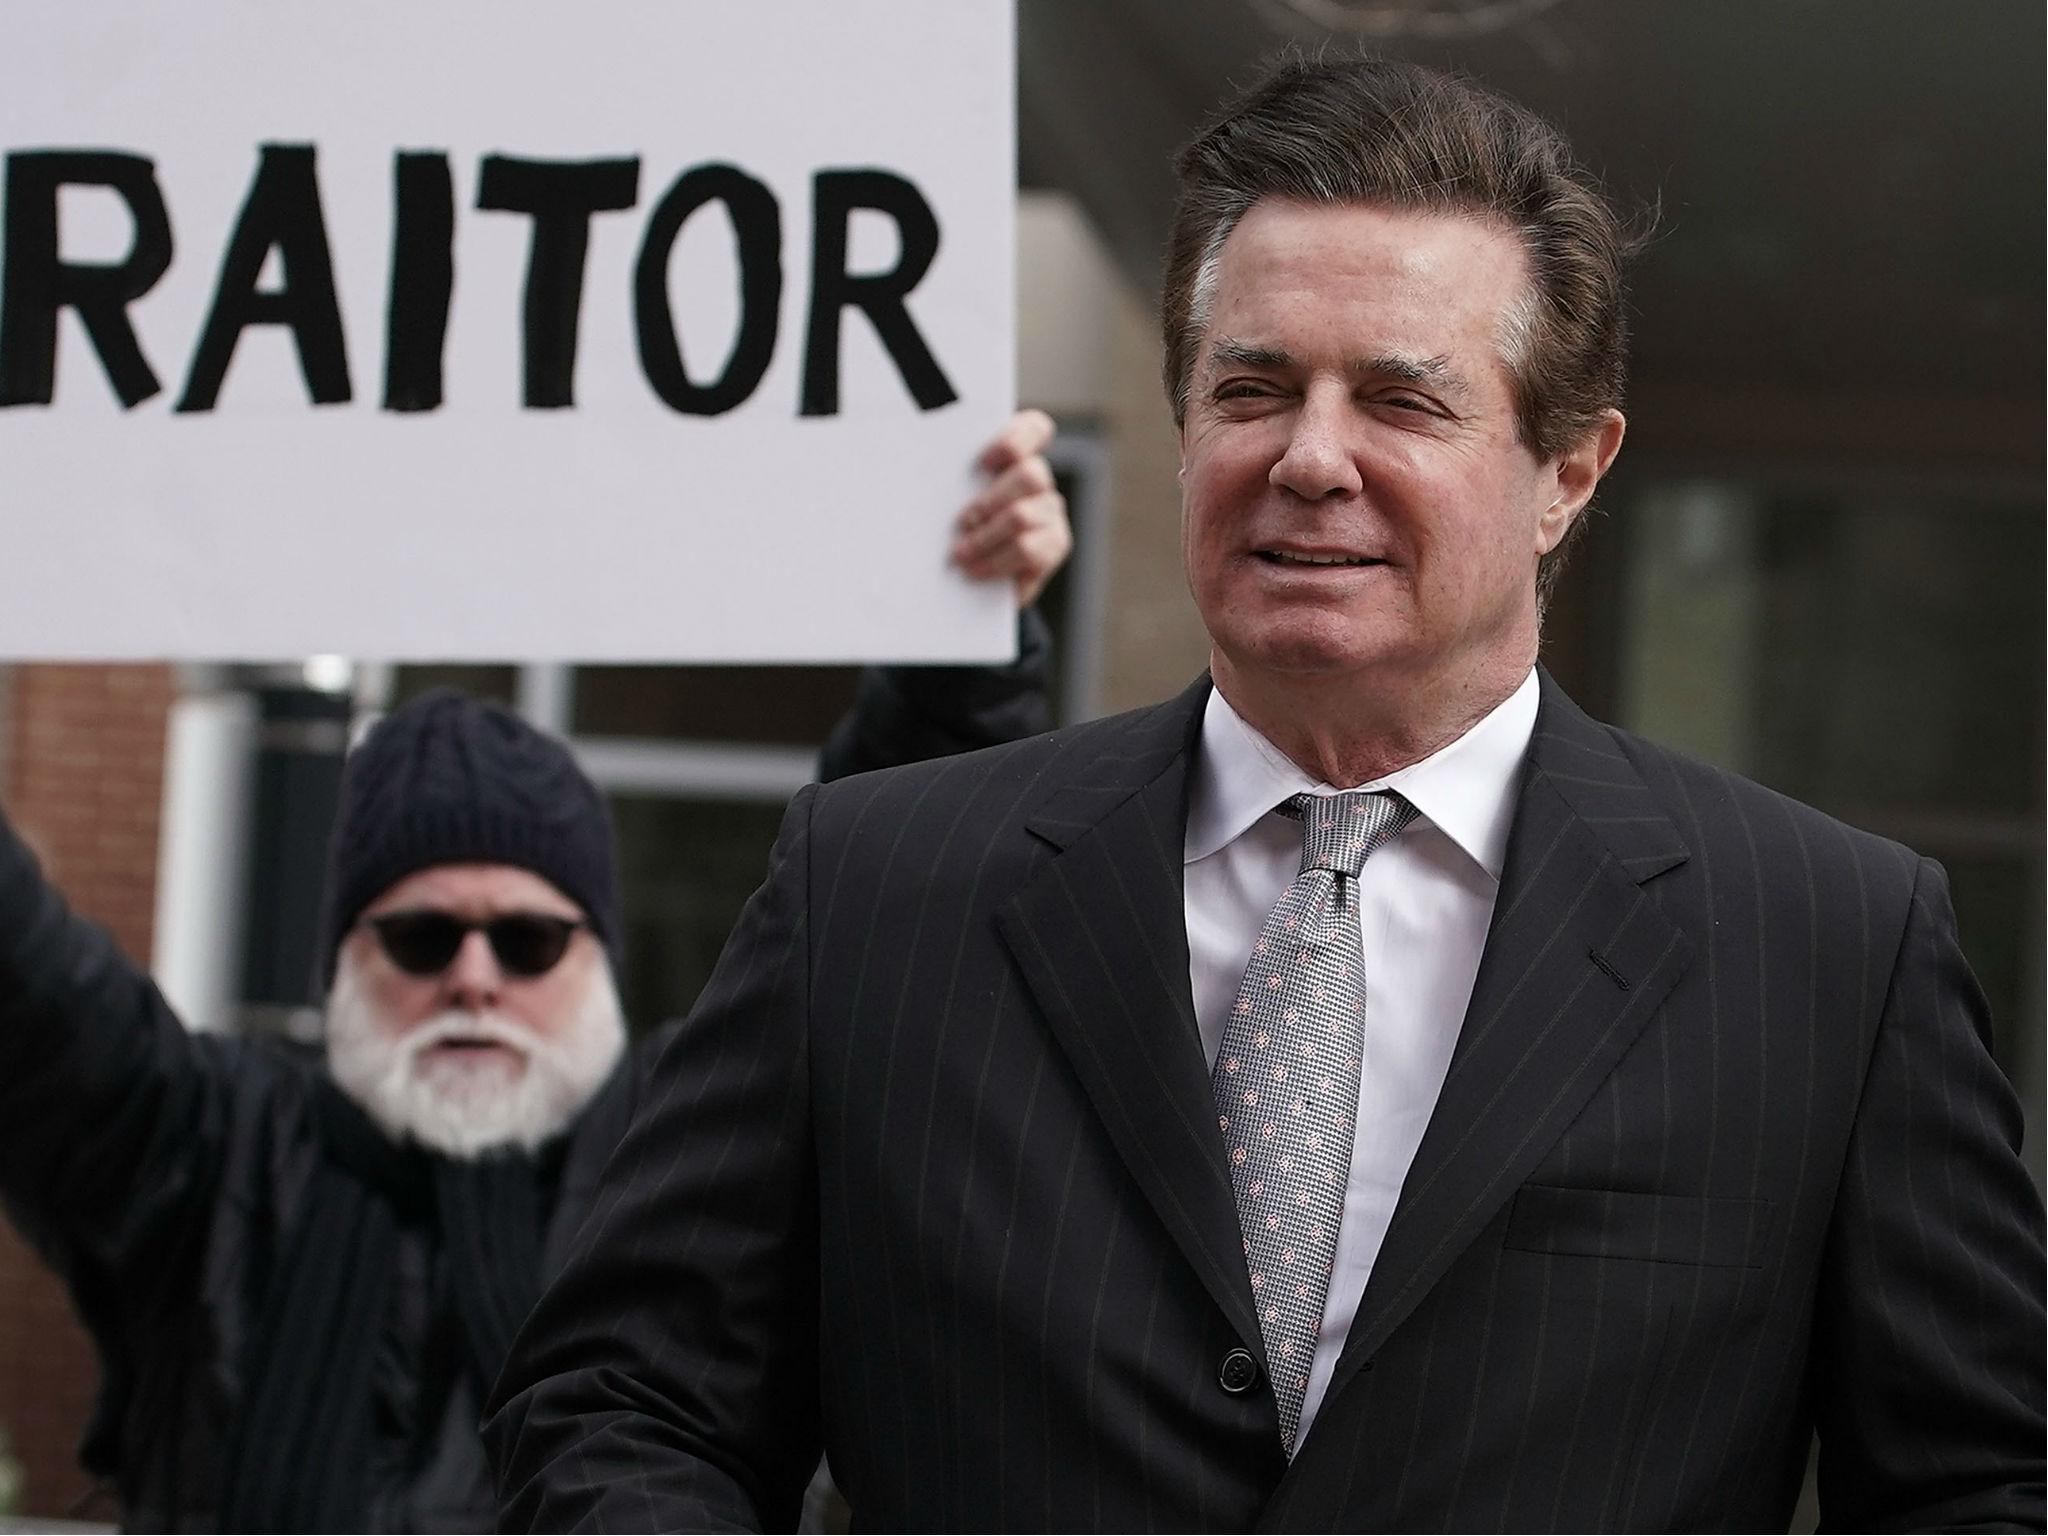 Mr Manafort has pleaded not guilty to the charges he faces